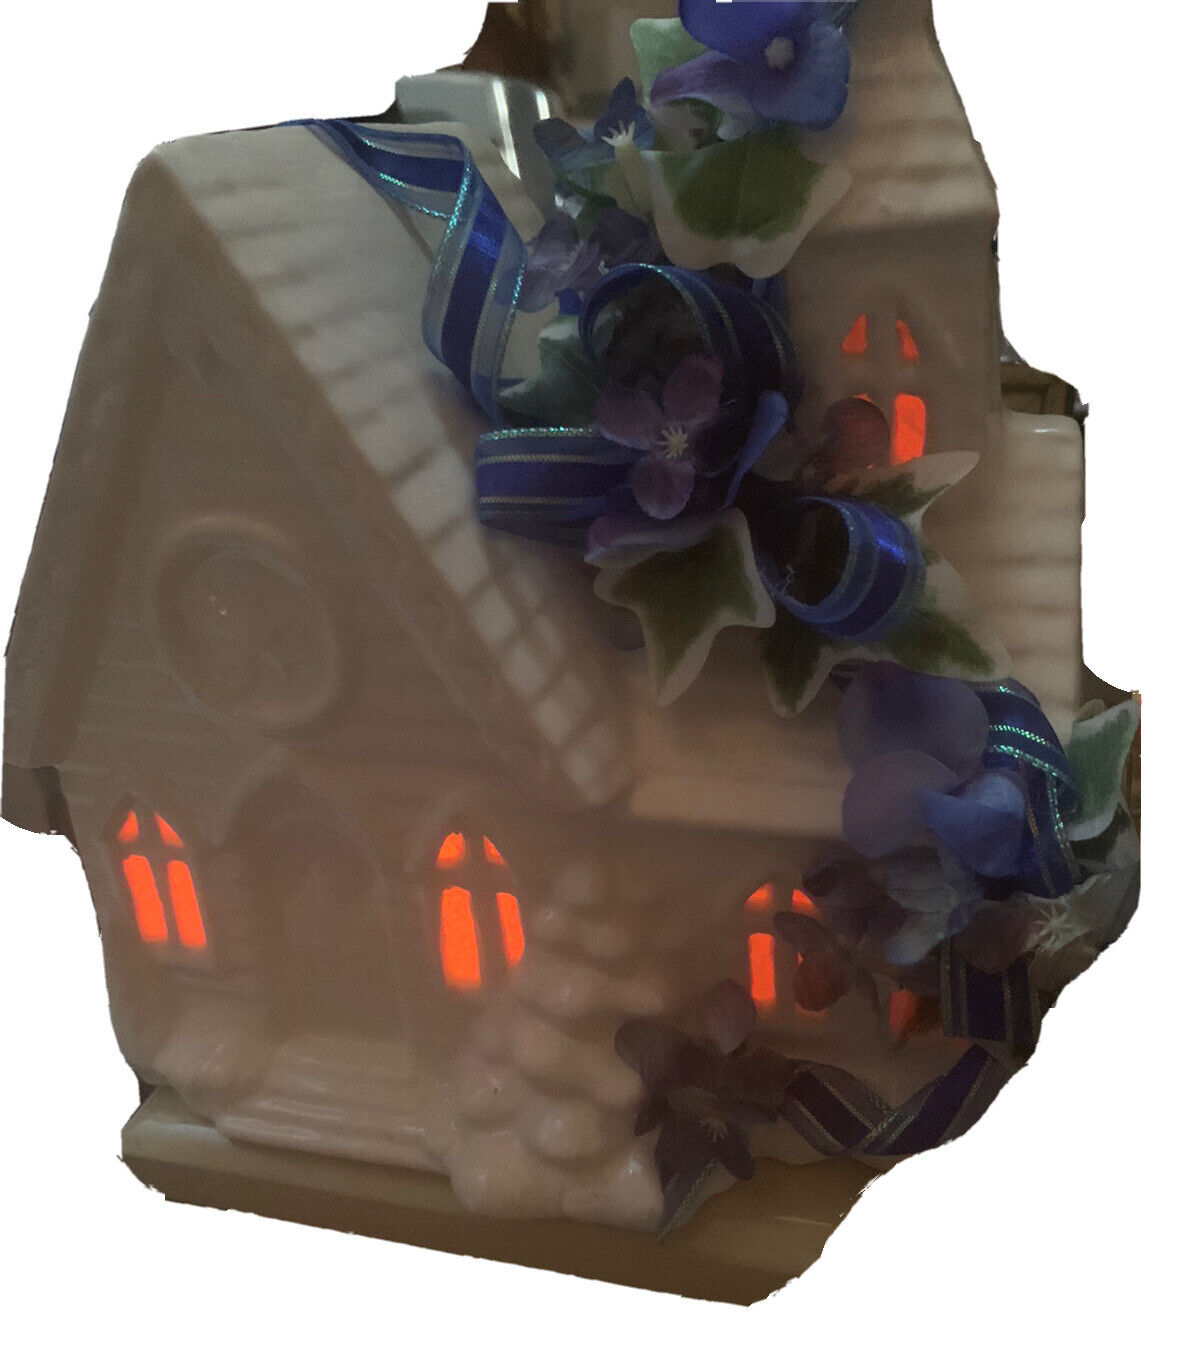 Ceramic Church Music box lighted Plays Amazing Grace Embellished Blue Floral